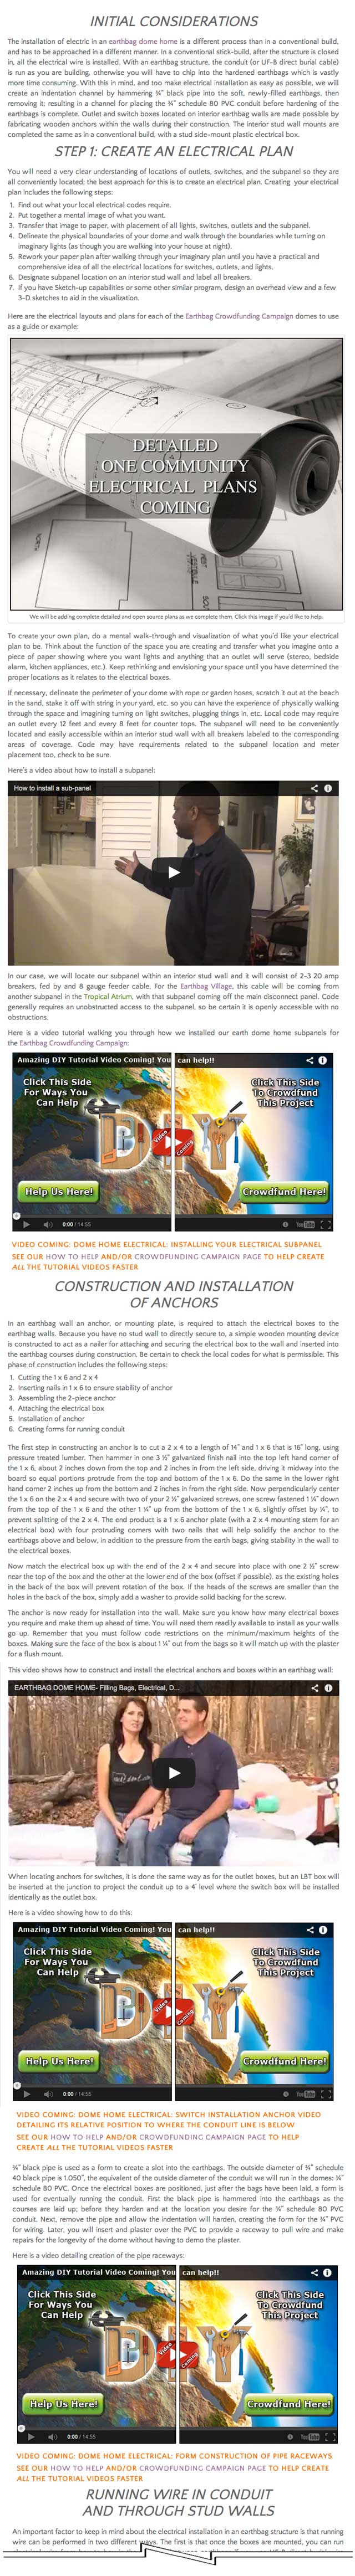 Dome Home Energy Infrastructure Instructional page, One Community